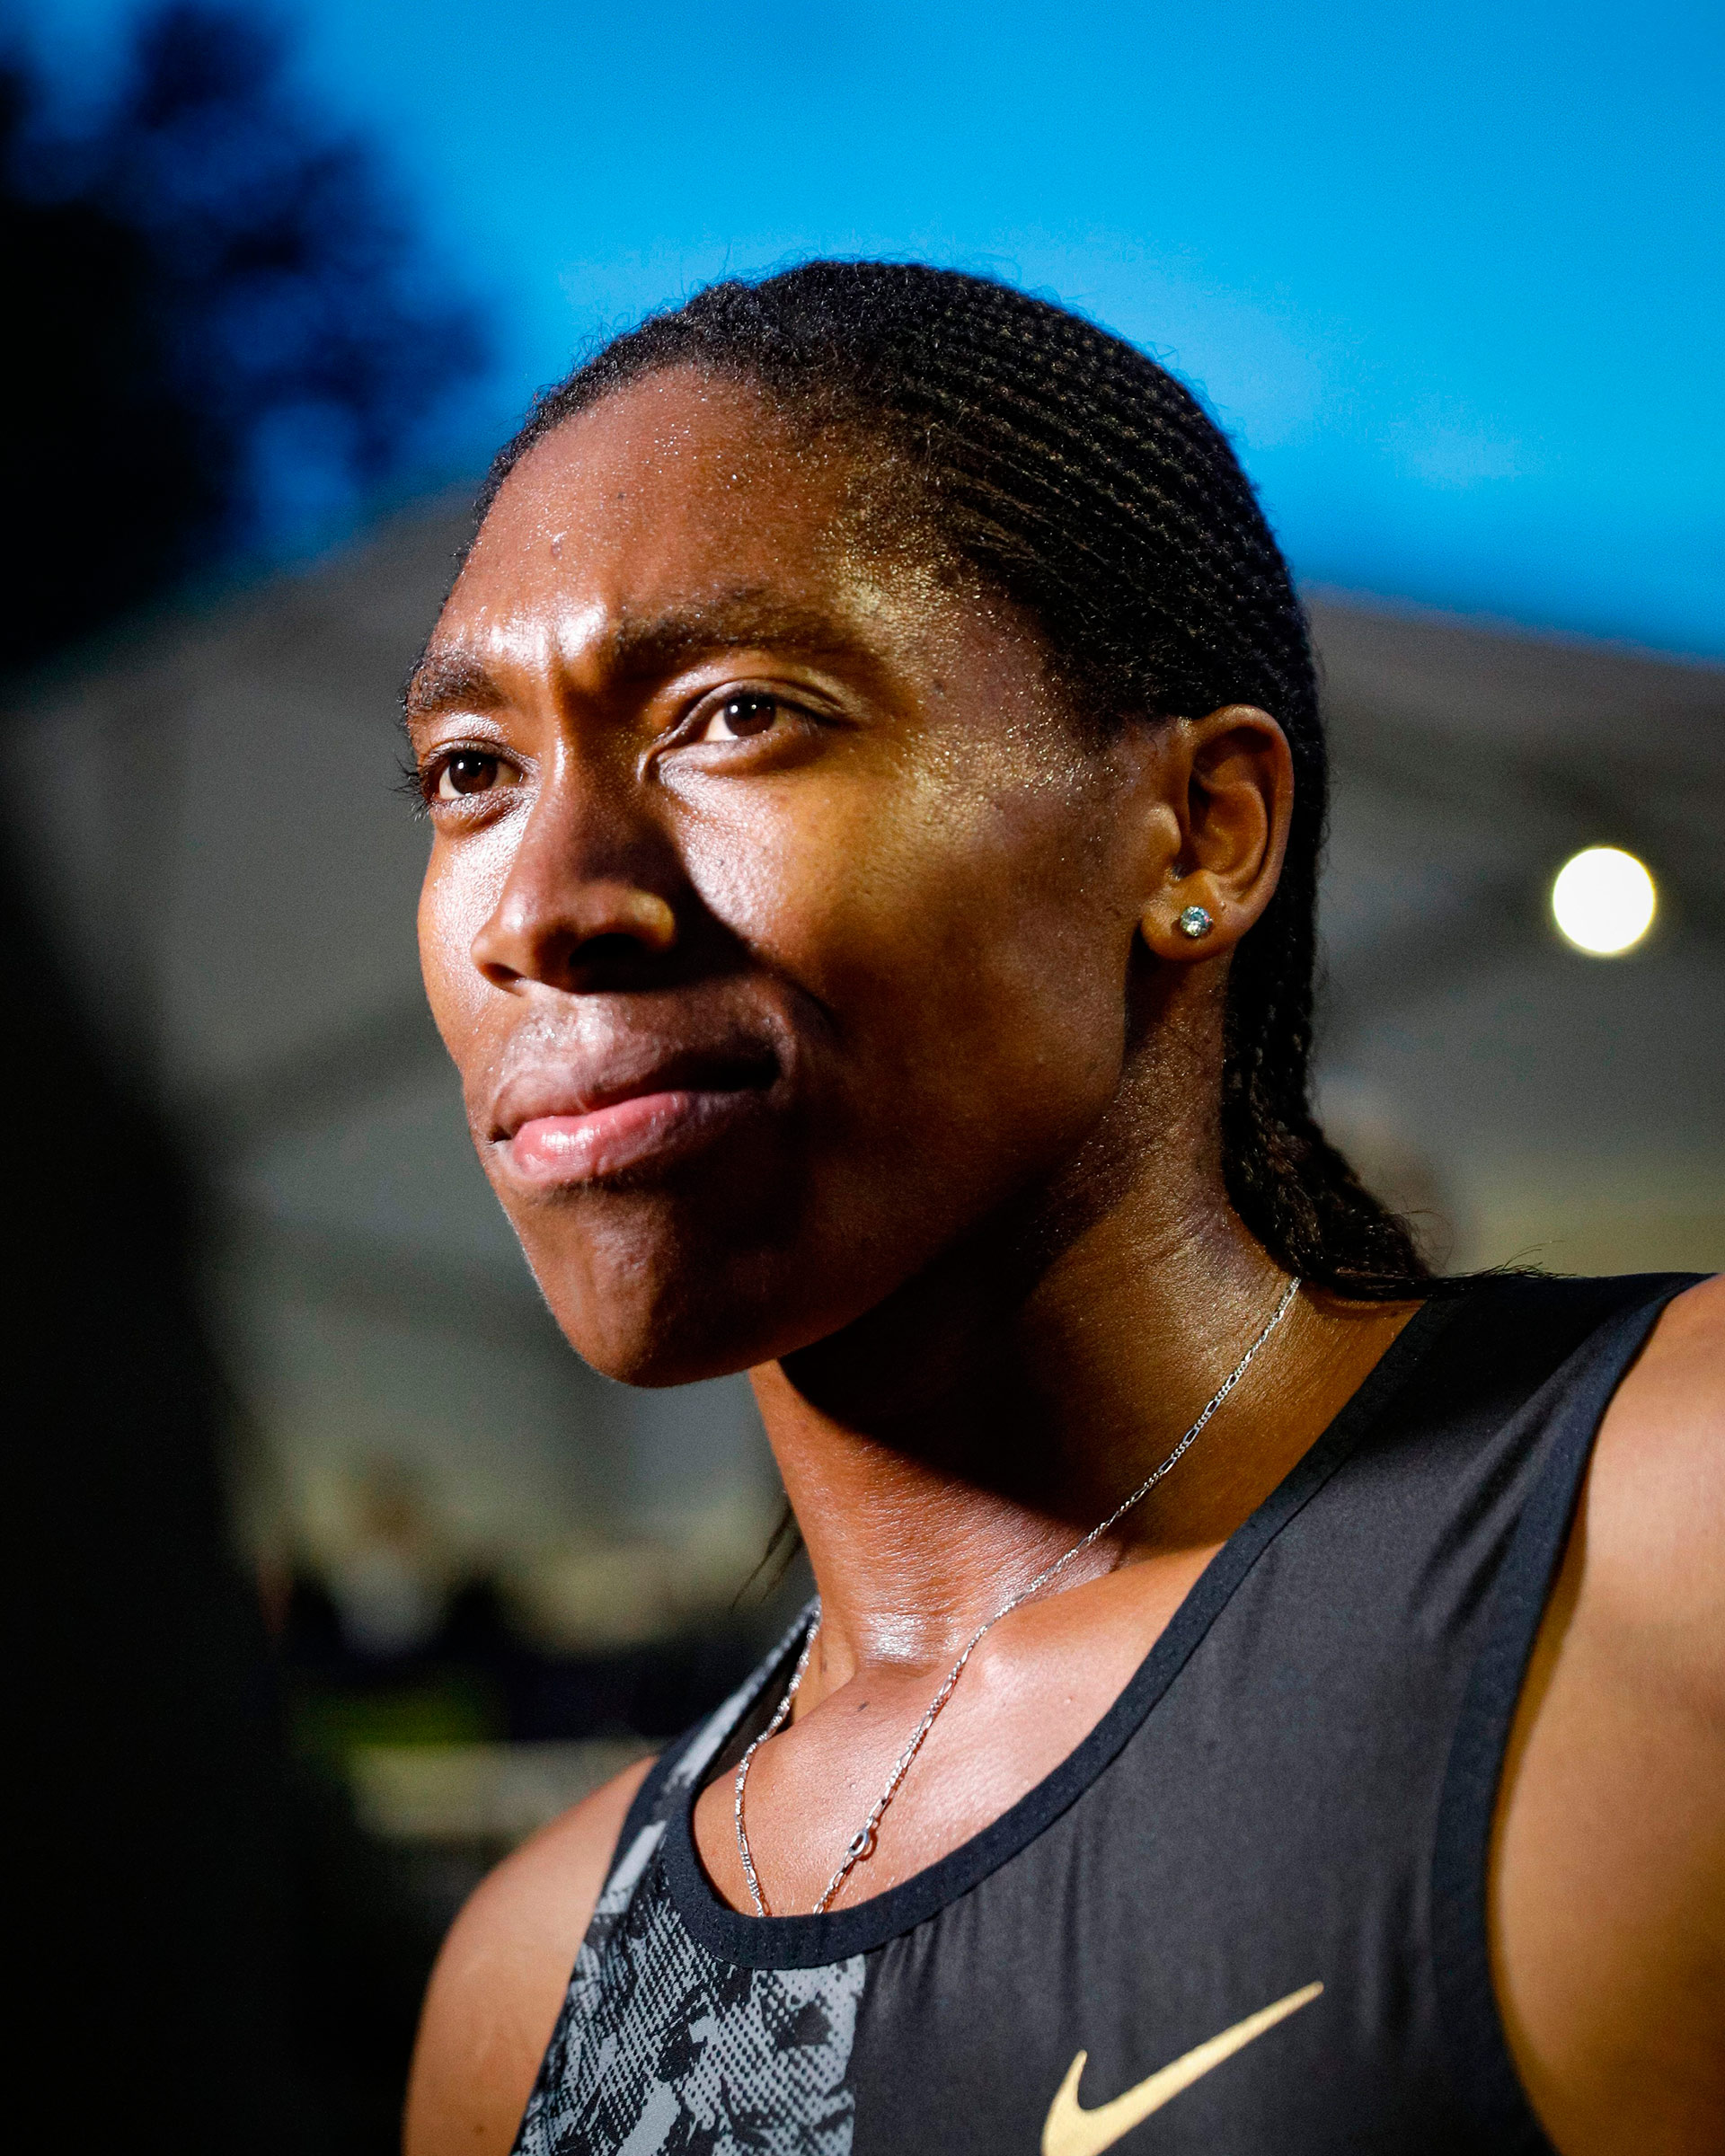 “If people want to come watch Caster Semenya run, then let them watch Caster Semenya run,” says track star Caster Semenya.